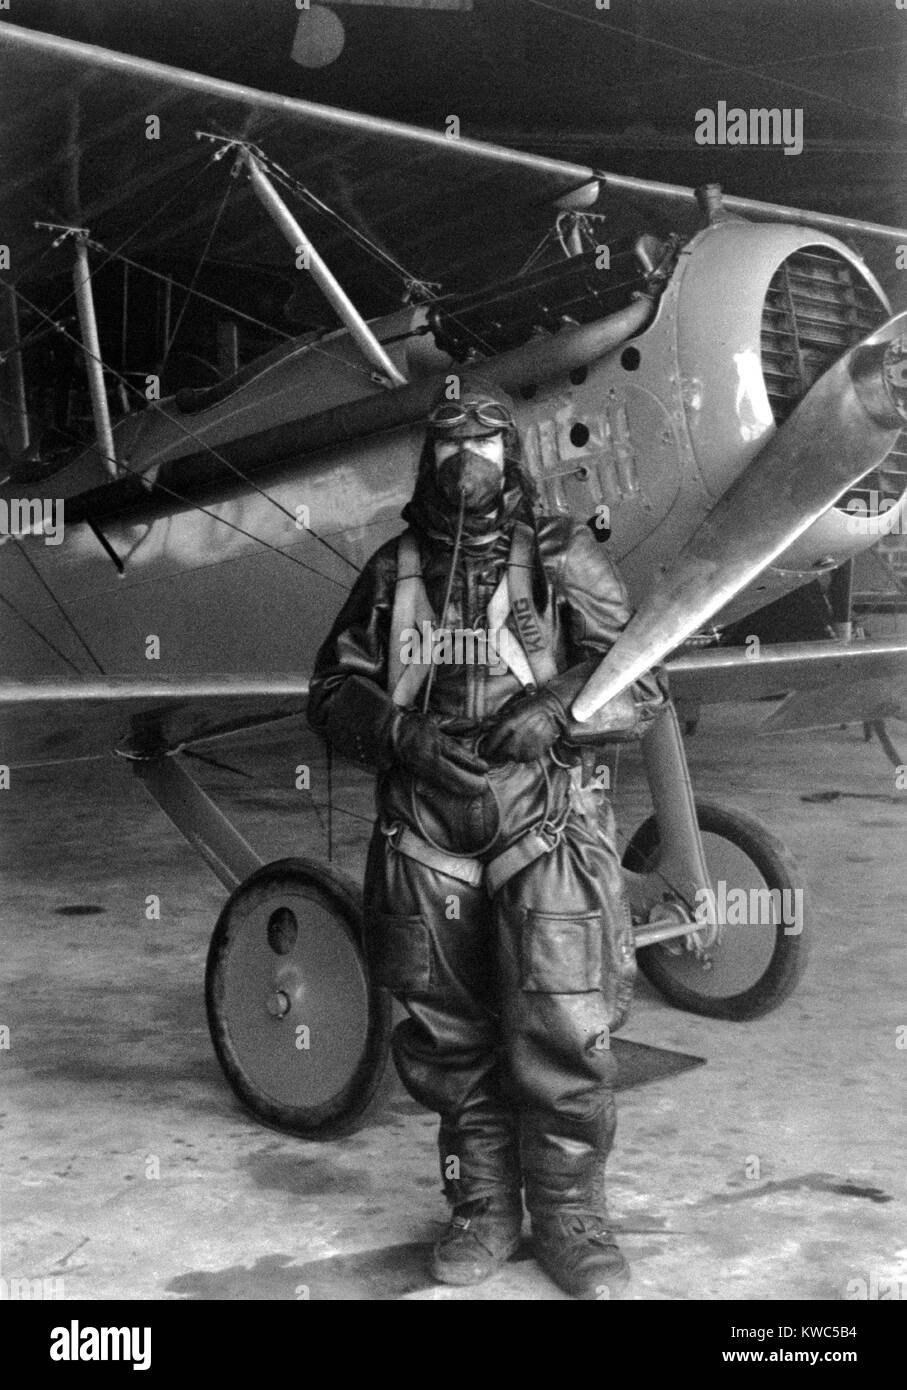 Test pilot Paul King in a fur lined leather flying suit and oxygen mask before take off, Oct. 17, 1925. He will fly the NACA Vought VE-7,from Langley Field, Hampton, Virginia. National Advisory Committee for Aeronautics, NACA, was a Federal agency established in 1915, and was the predecessor of NASA. (BSLOC 2015 14 195) Stock Photo